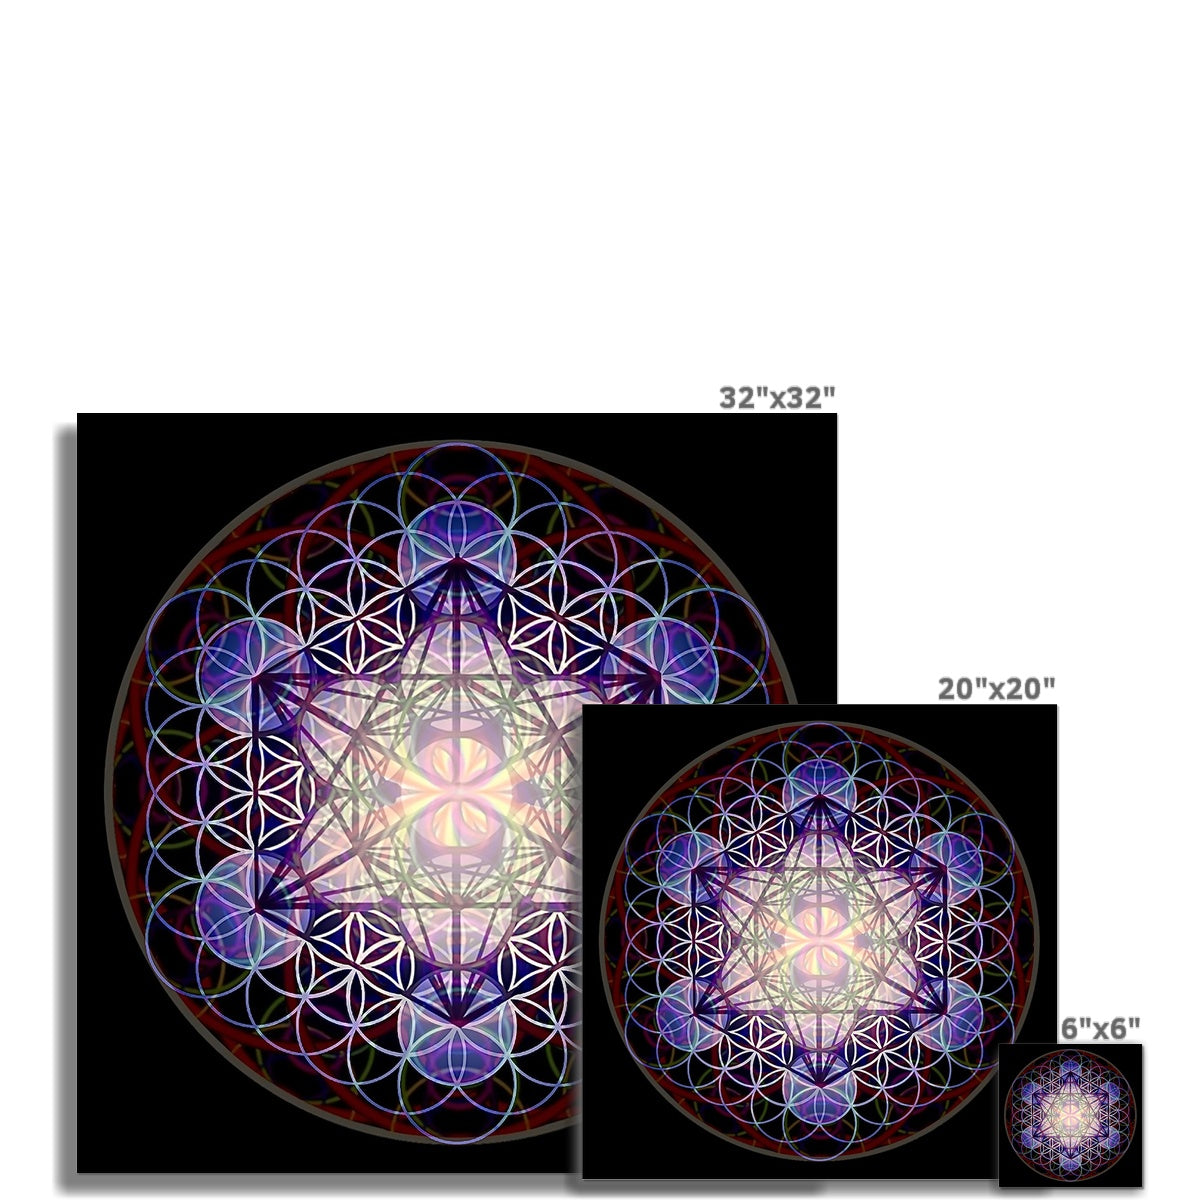 The Metatron's Cube with inverted Sound waves Fine Art Print